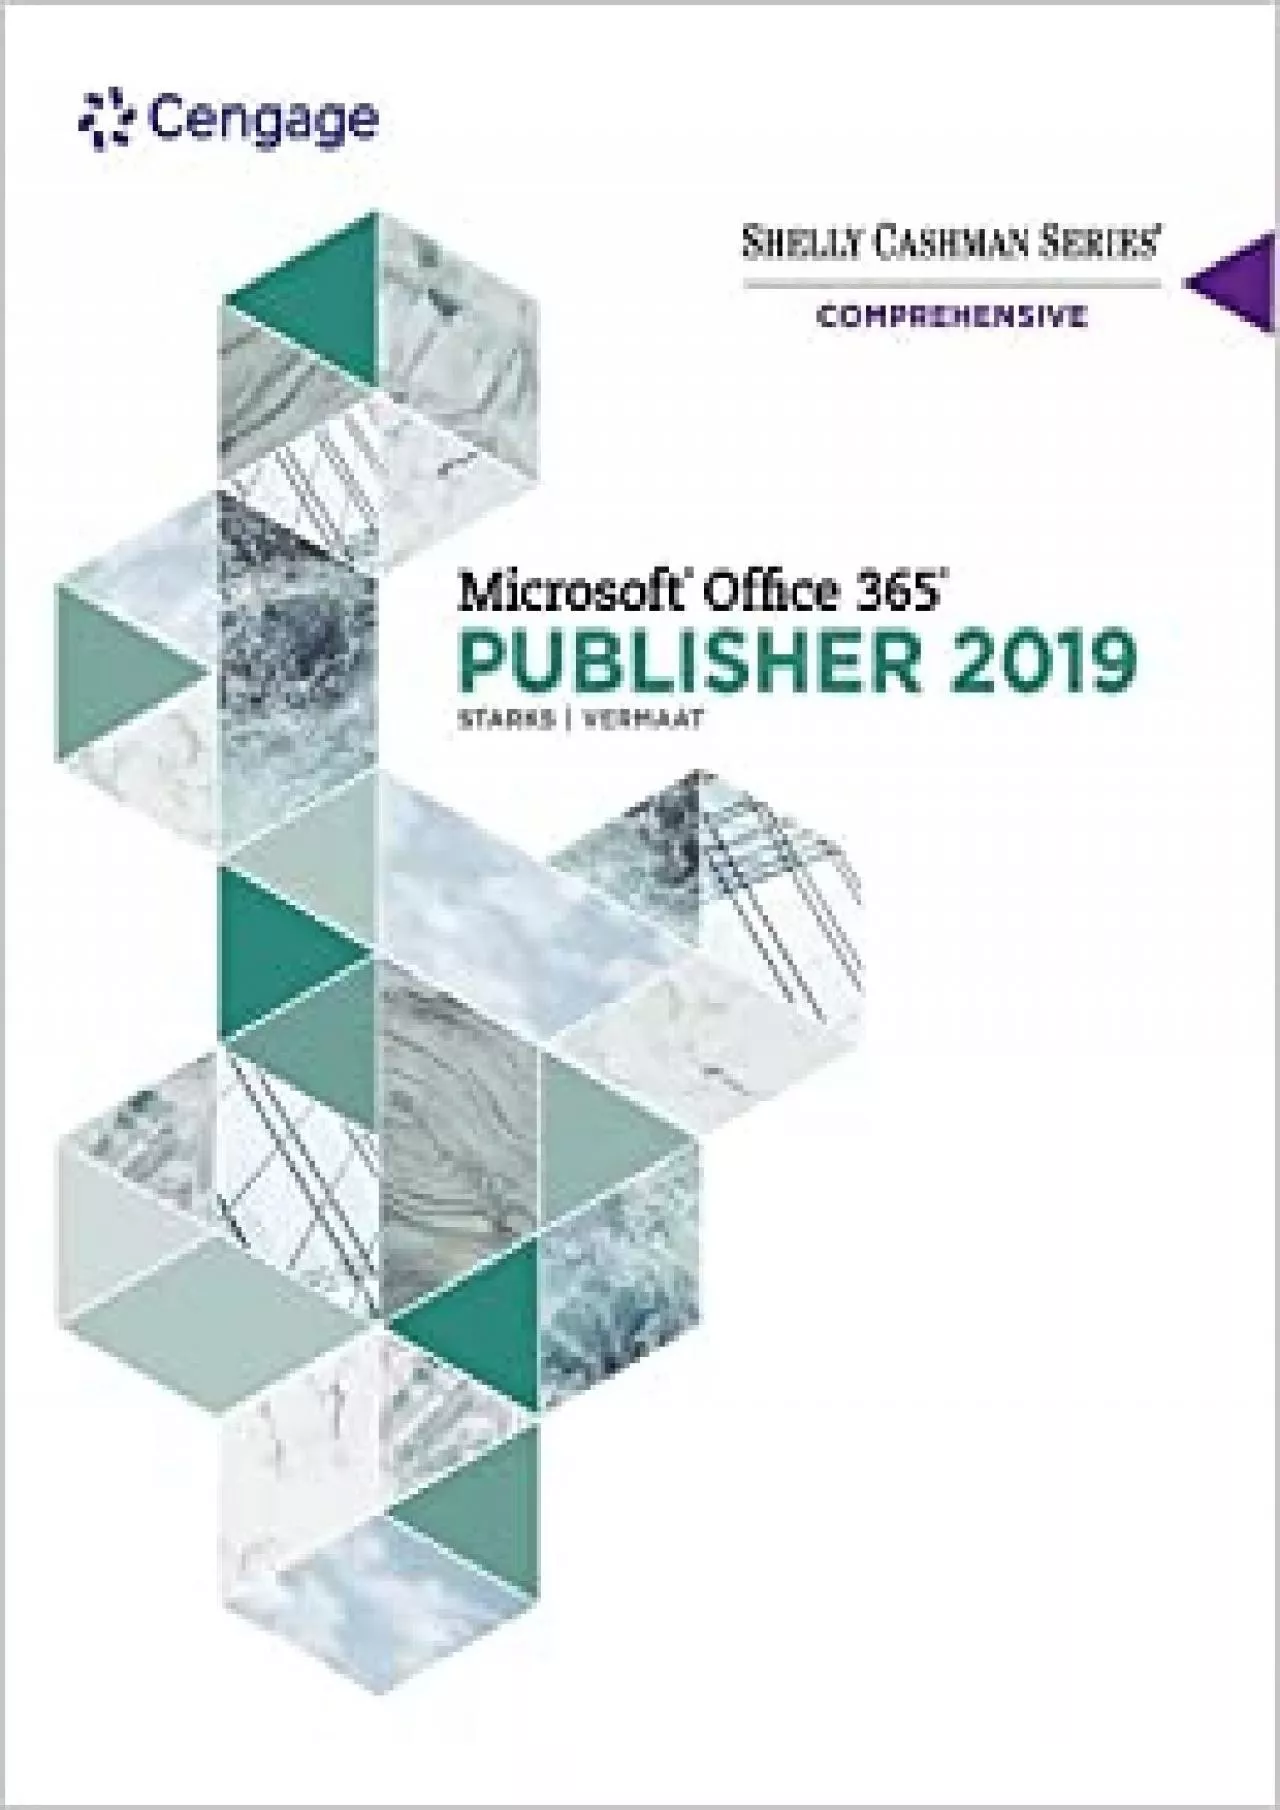 Shelly Cashman Series Microsoft Office 365 & Publisher 2019 Comprehensive (MindTap Course